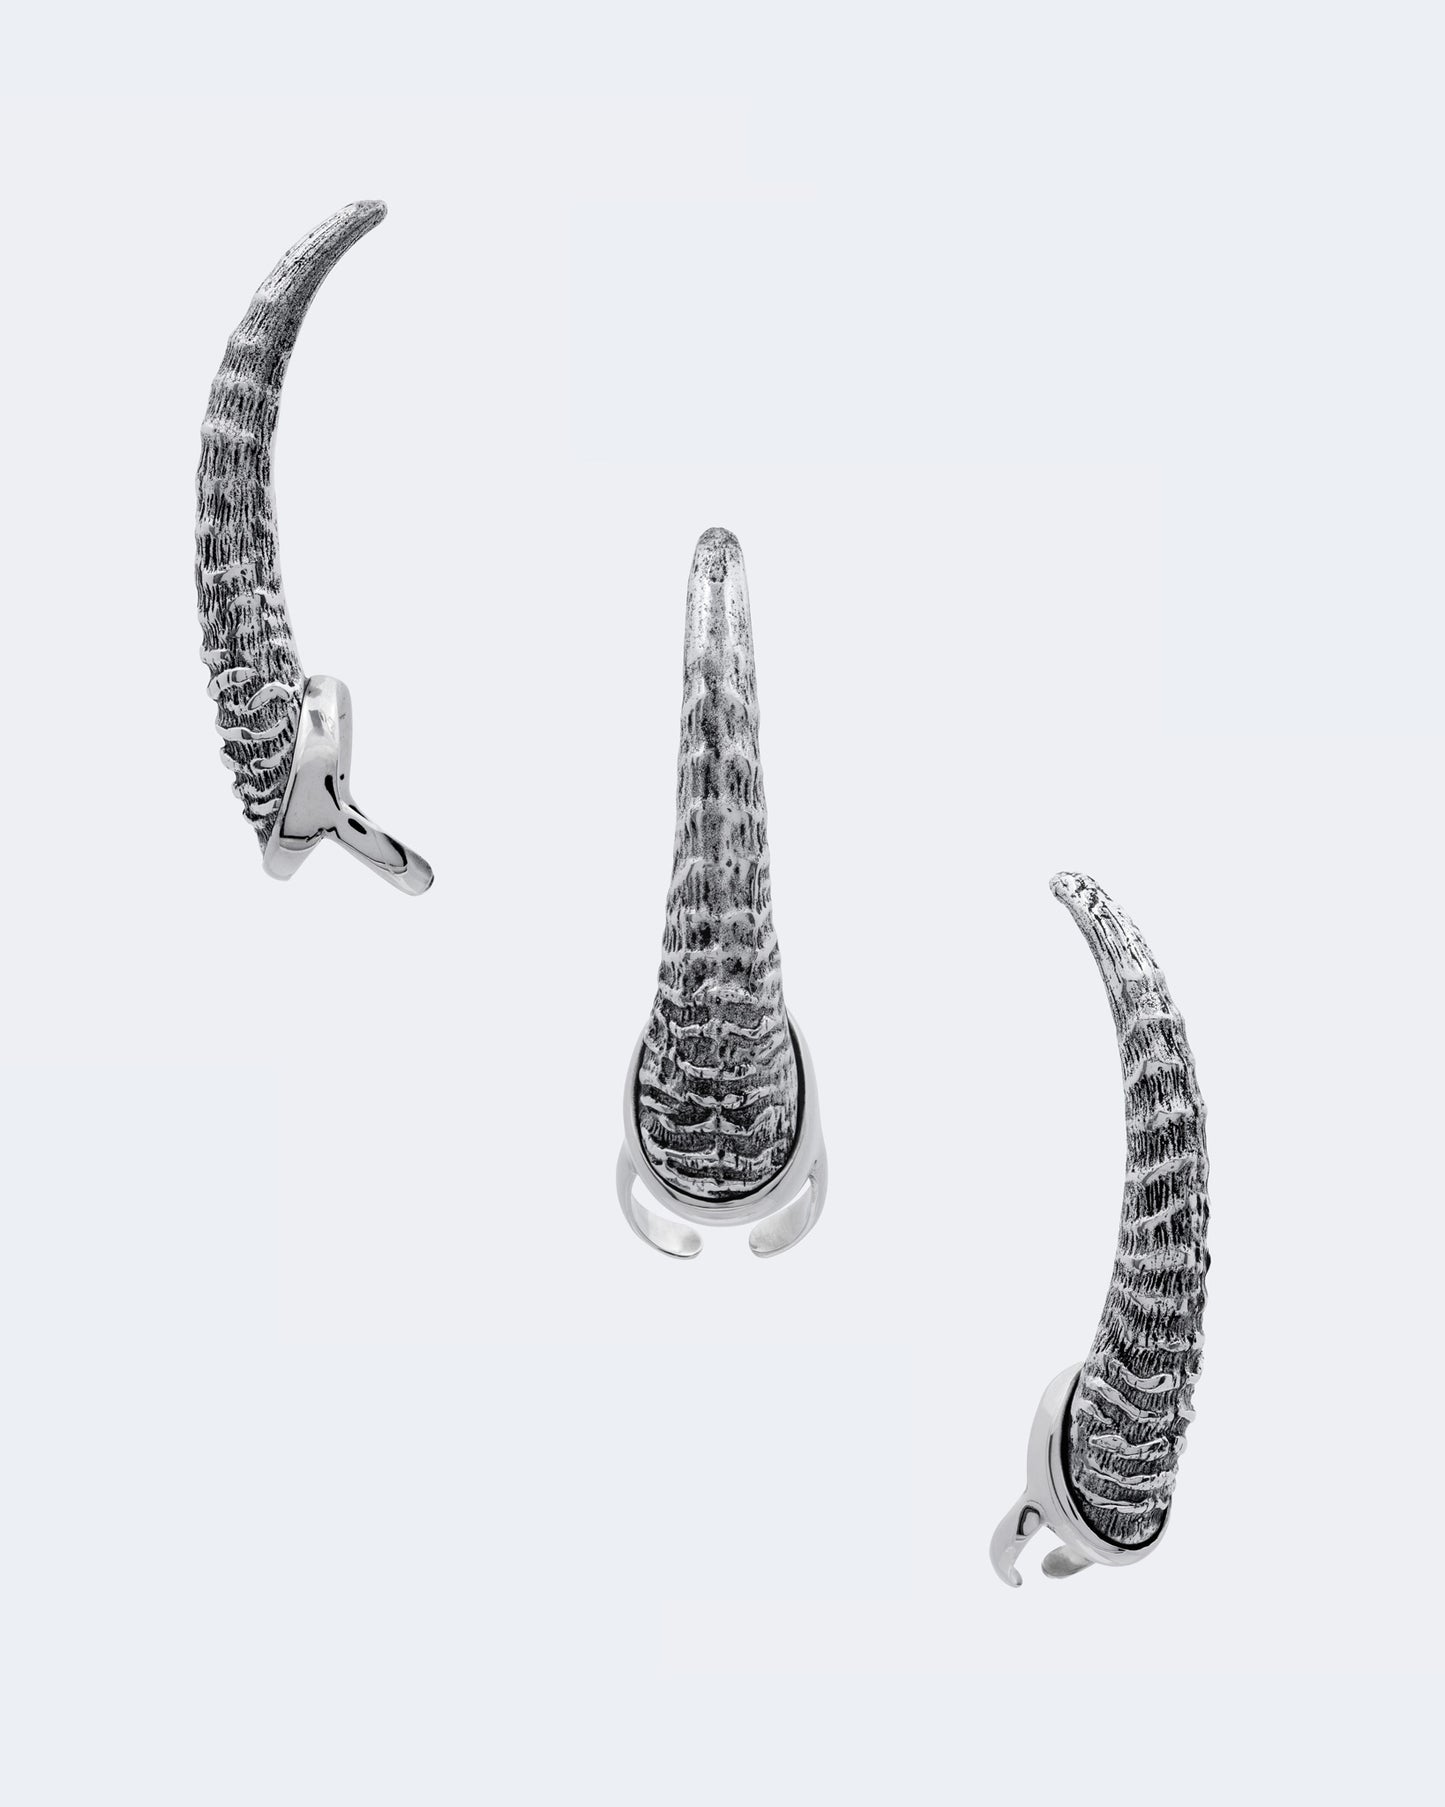 Beastie Claw Rings (Set of 5)